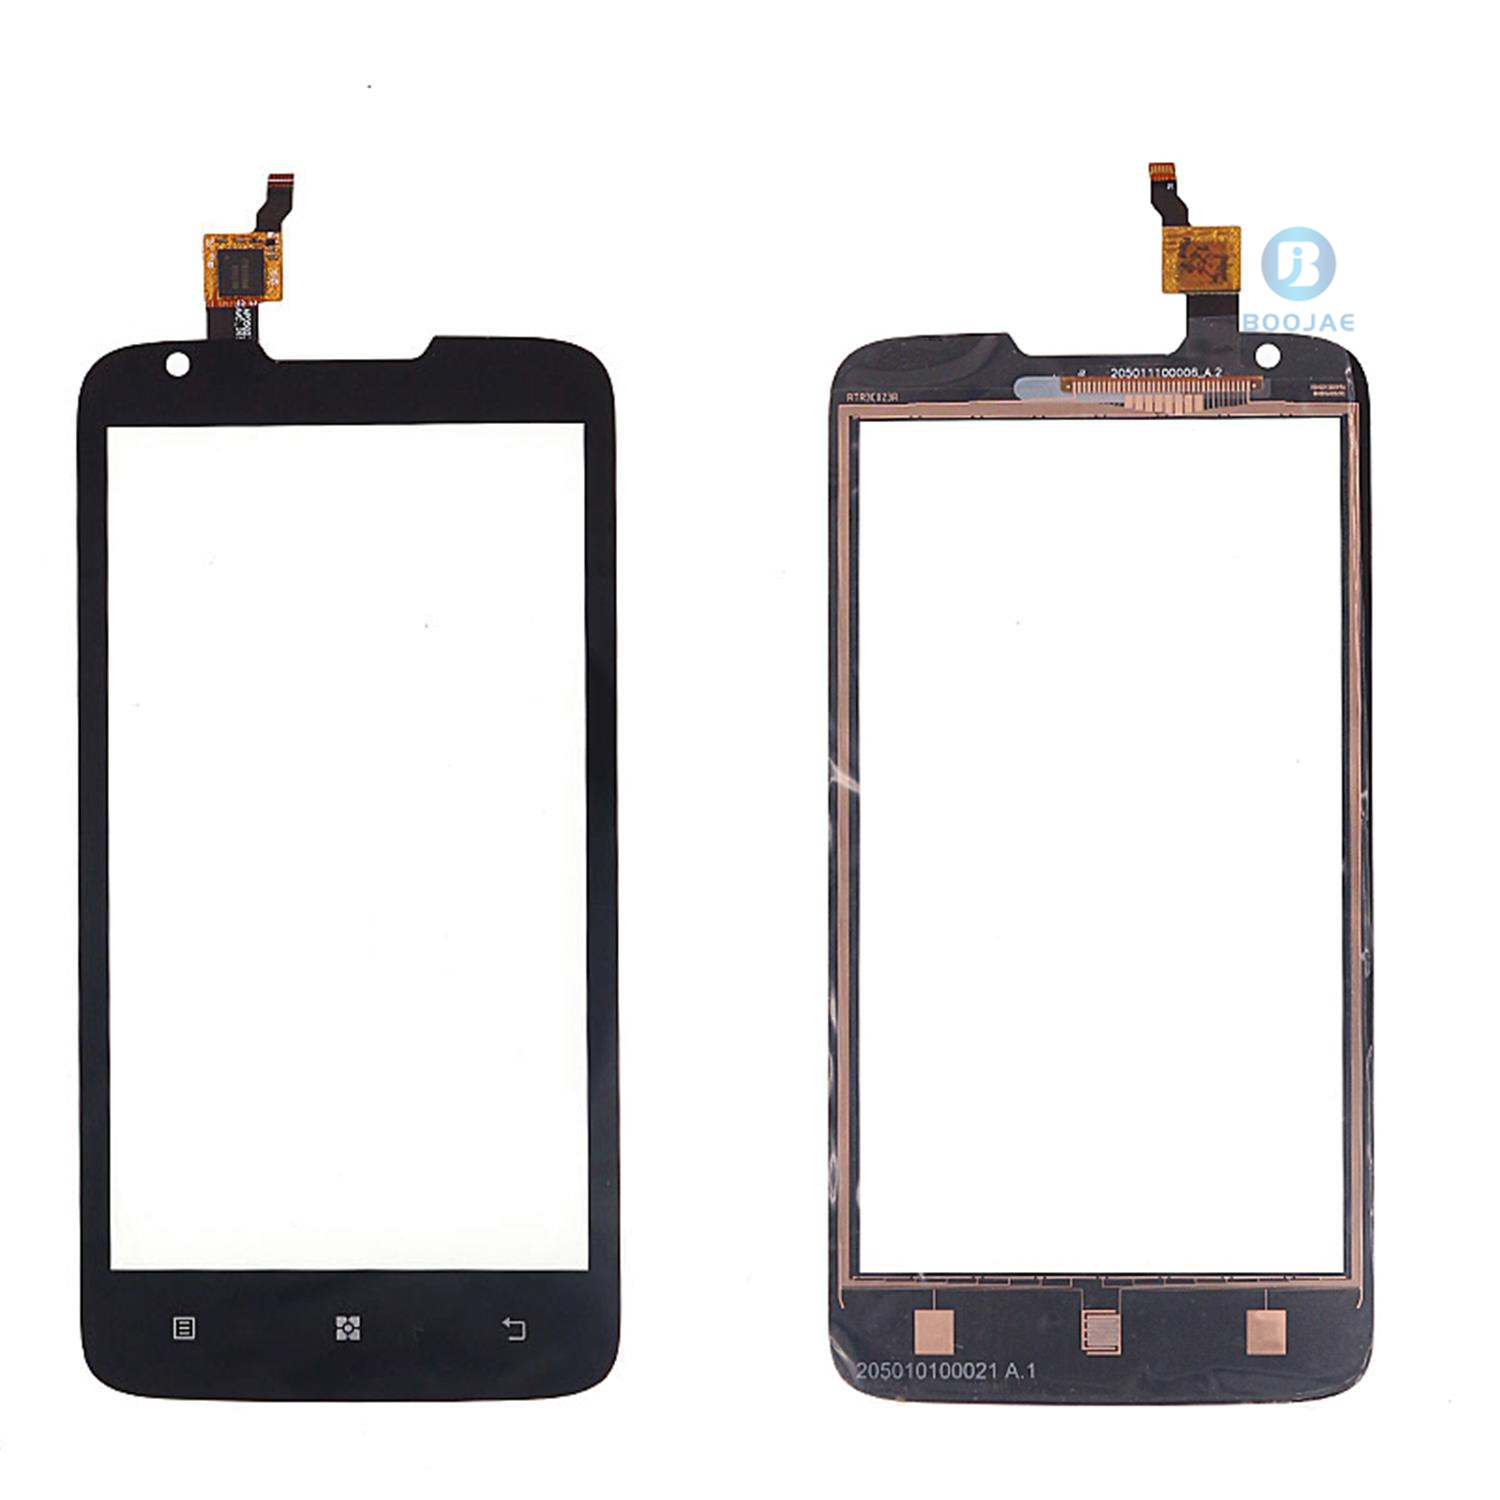 For Lenovo A680 touch screen panel digitizer